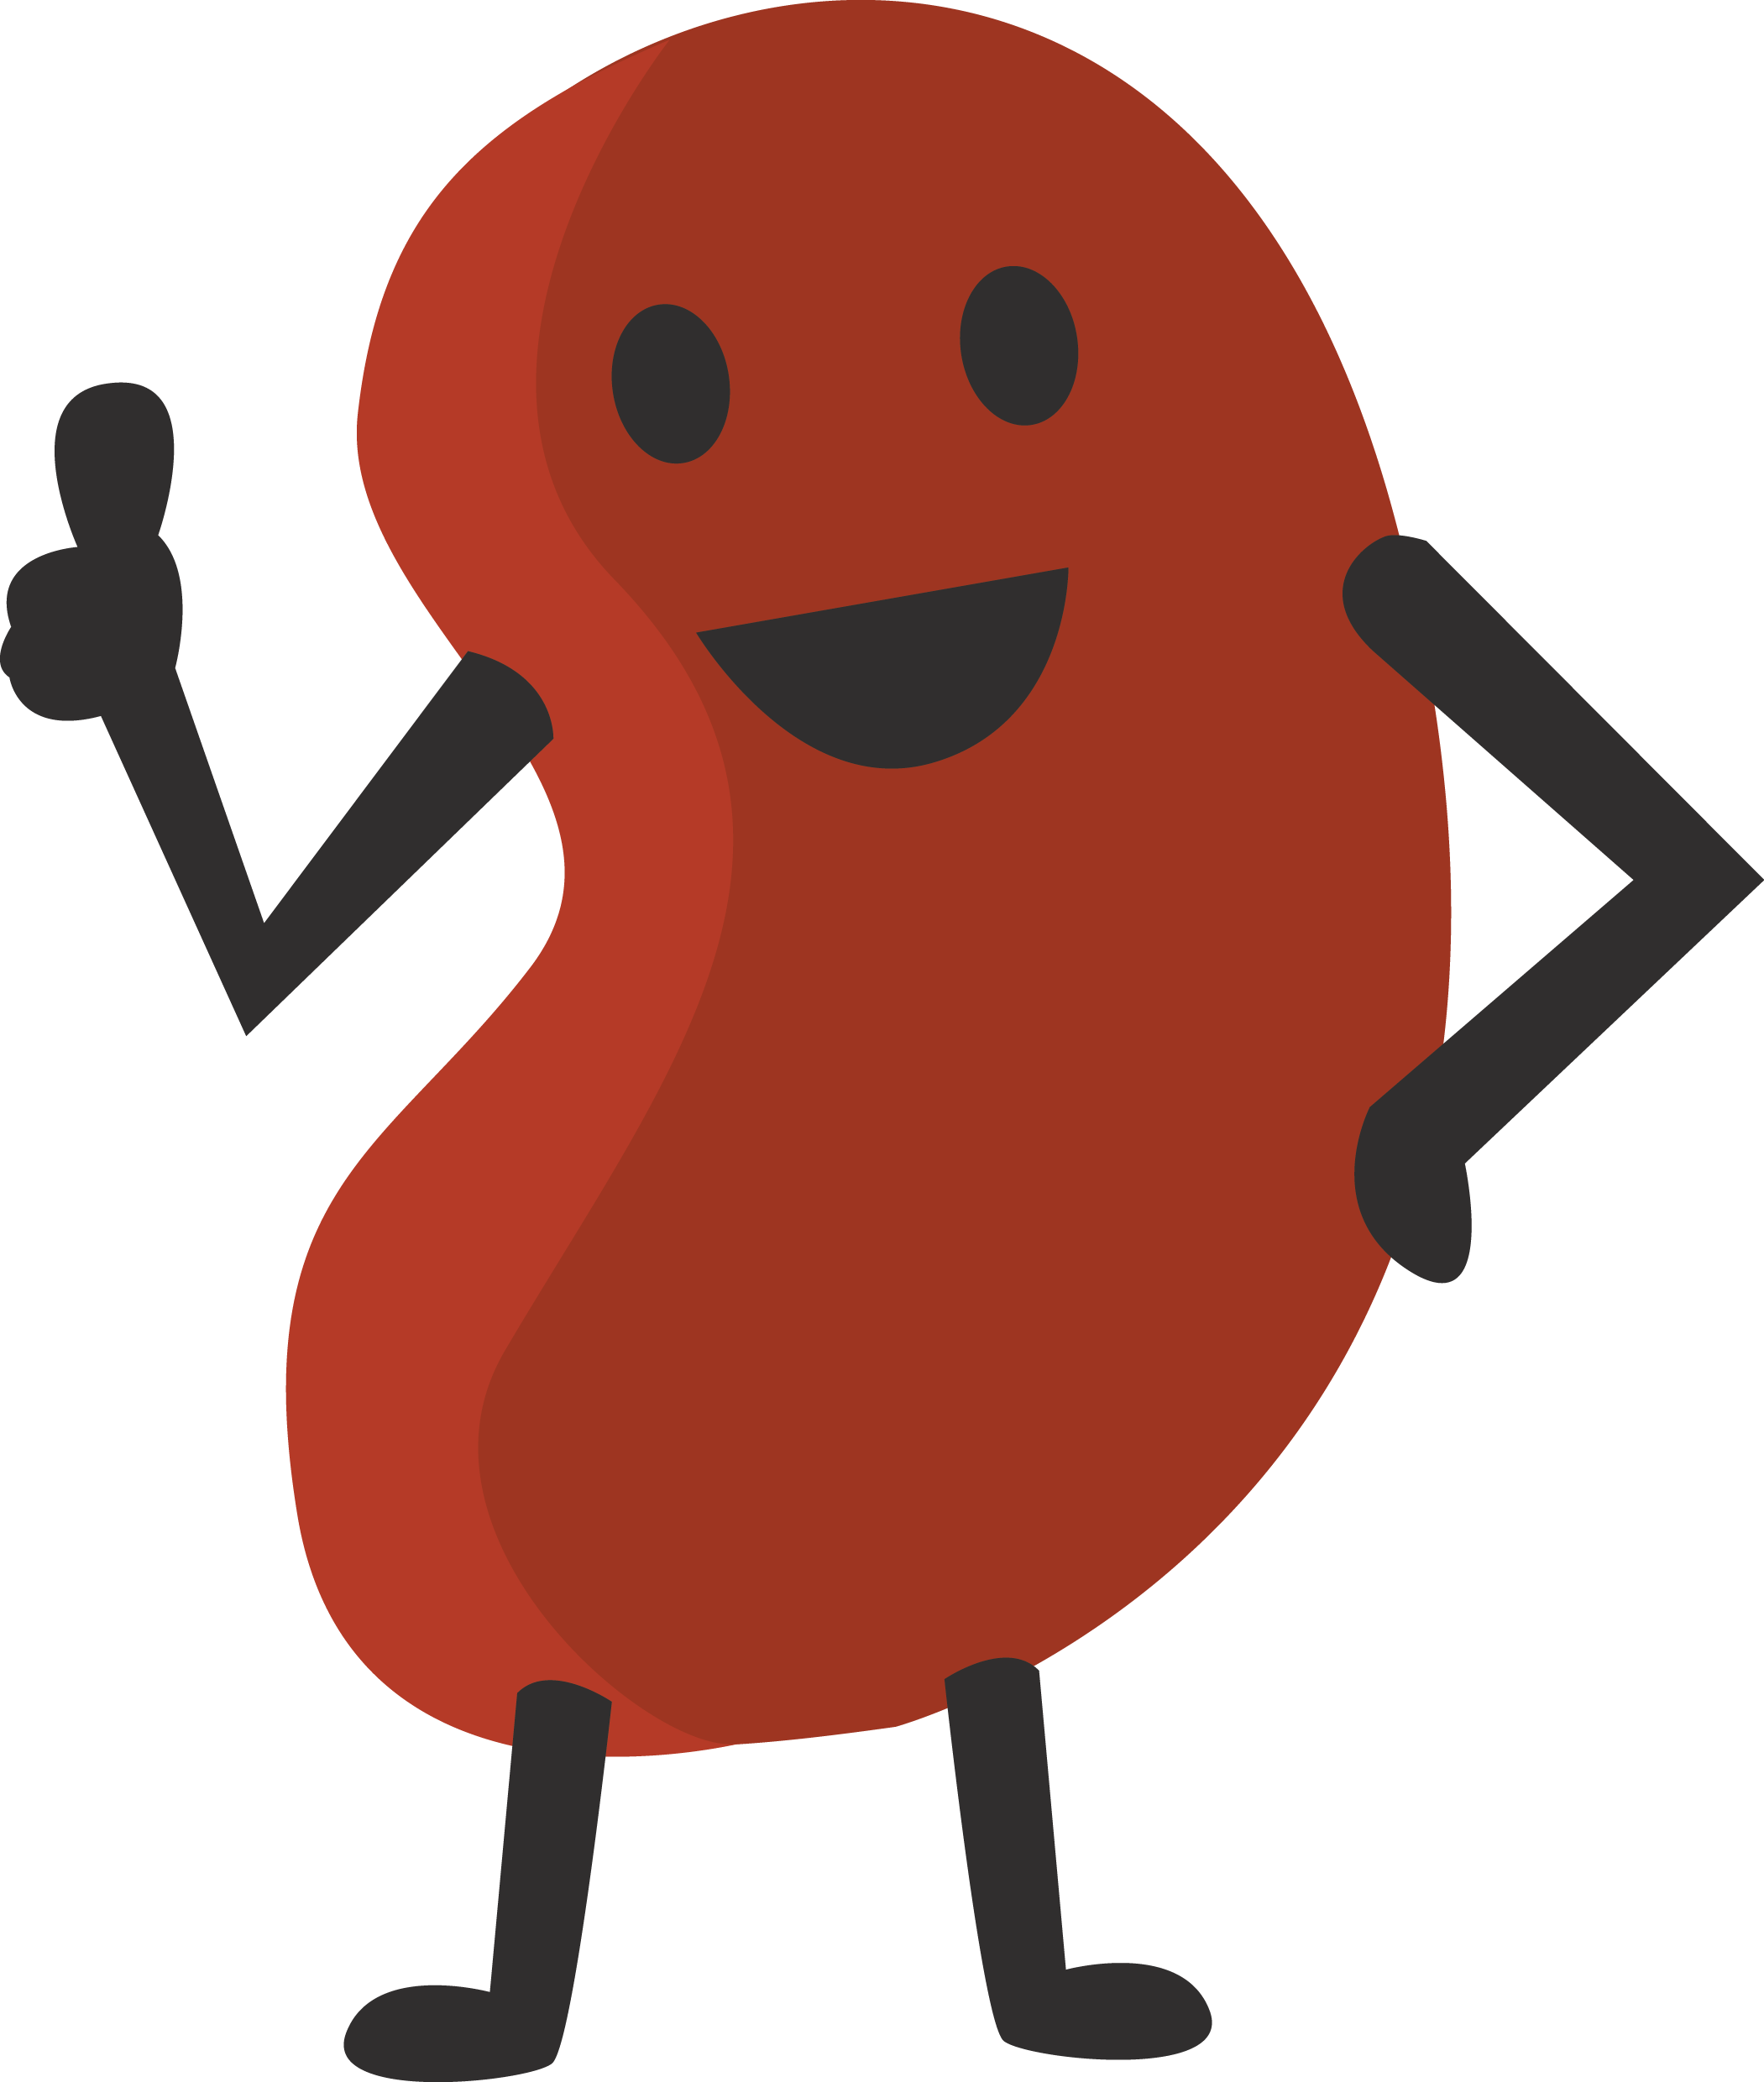 There Is 29 Kidney Bean Character   Free Cliparts All Used For Free